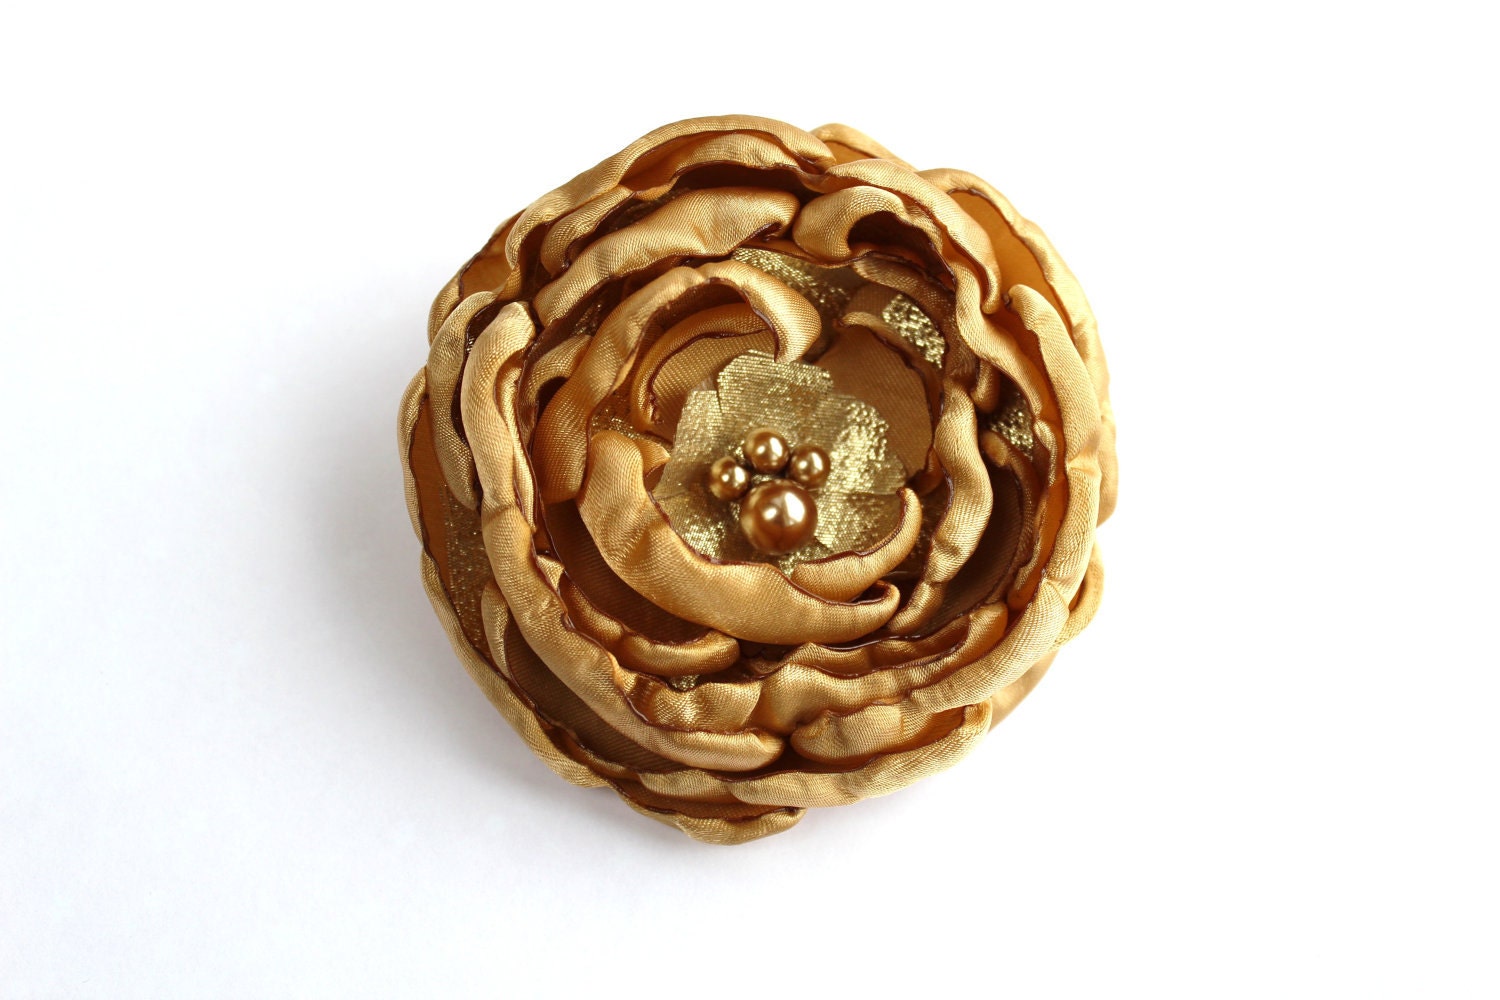 Golden Flower Brooch/ Hair Clip/ Applique/ Sash Pin/ Handmade Accessory/ Free Shipping on Additional Items - SunnyApril